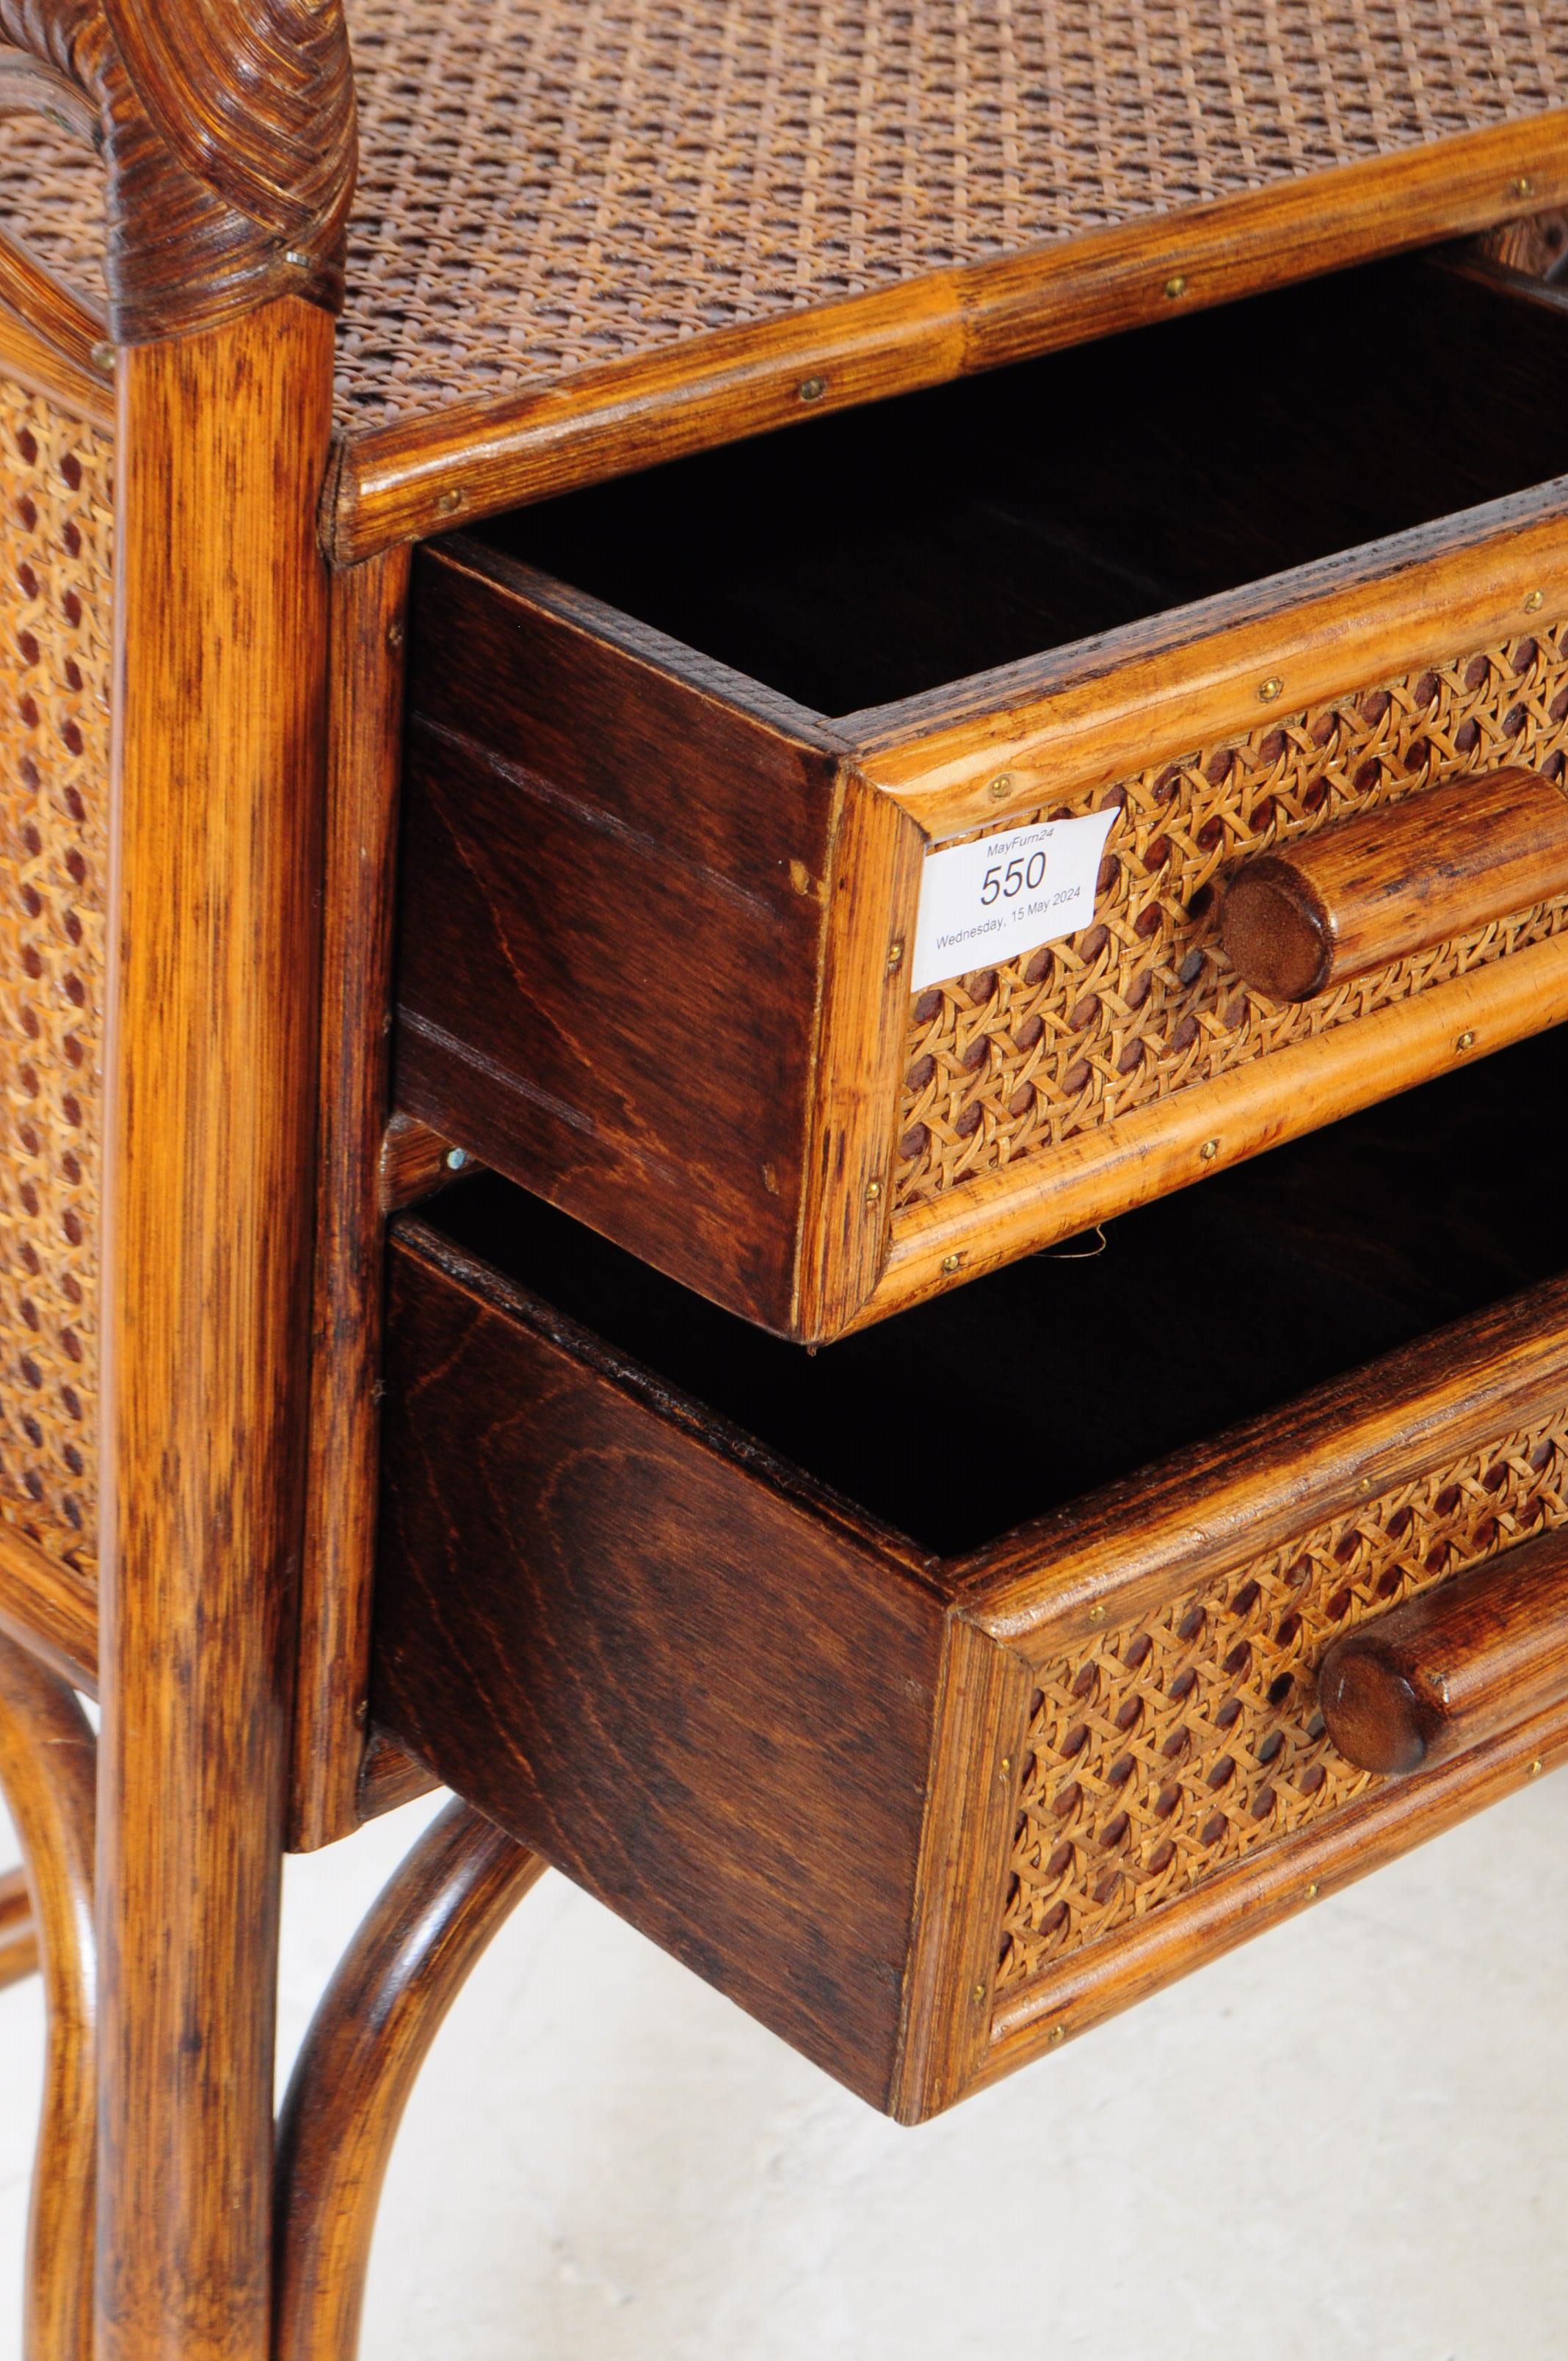 ANGRAVES OF LEICESTER - RETRO MID 20TH CENTURY RATTAN DESK - Image 4 of 6